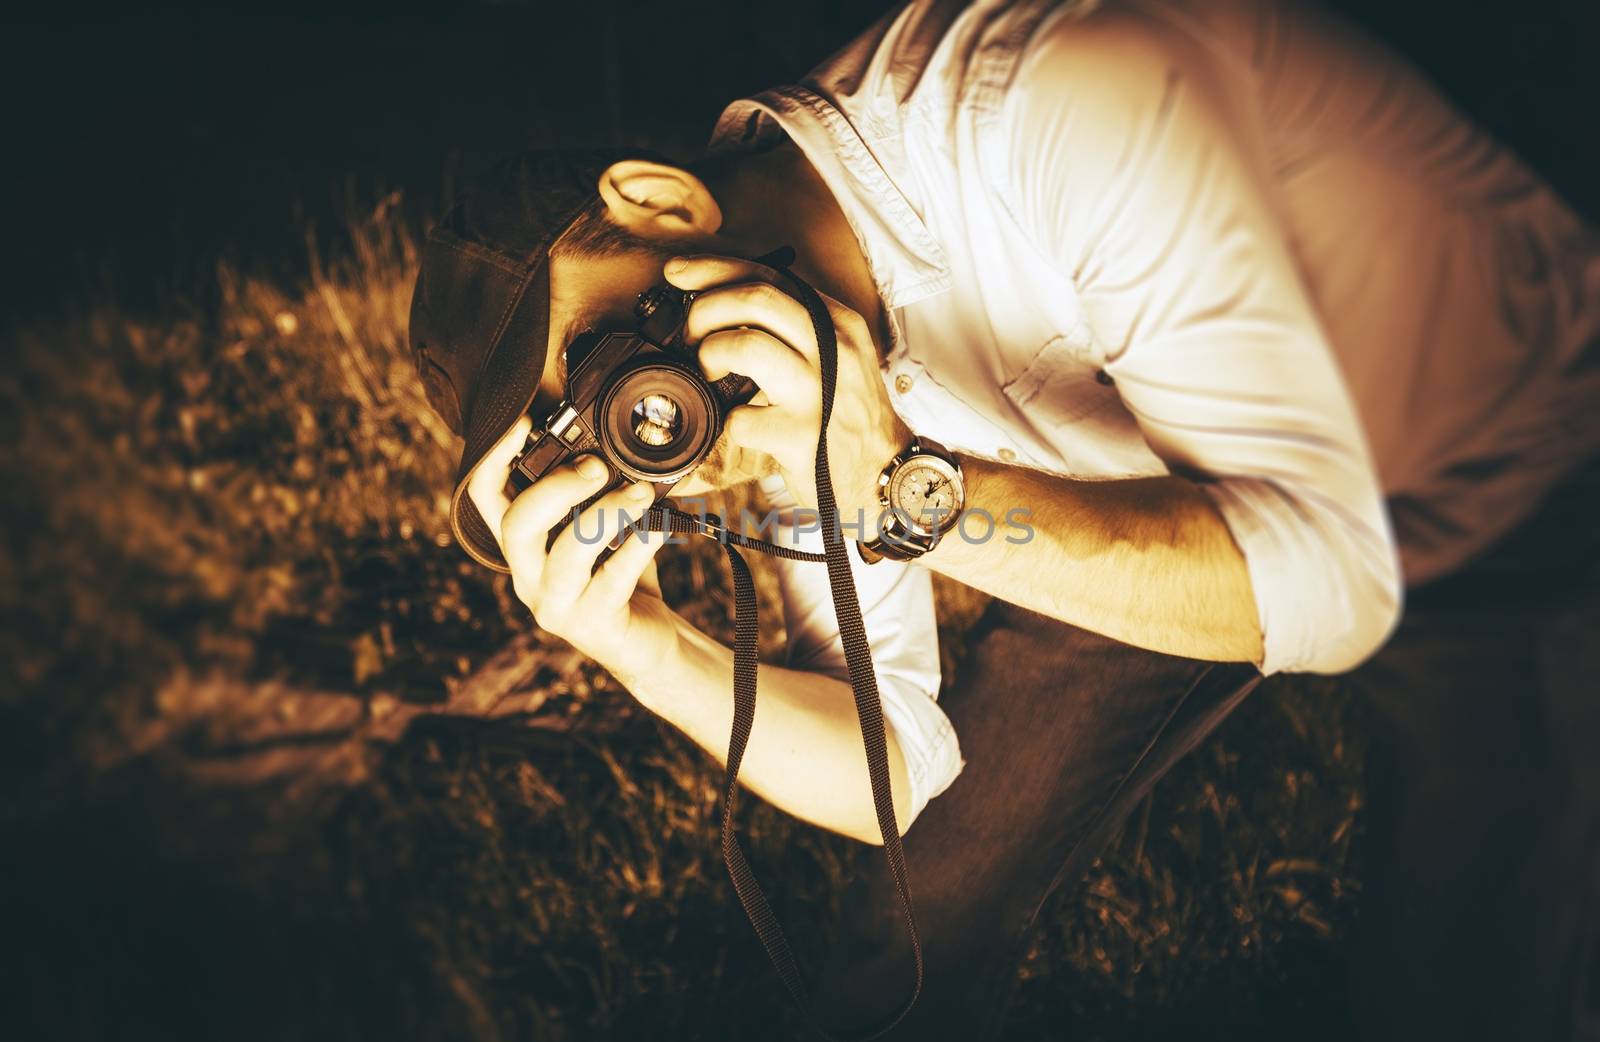 Photographer in Action. Caucasian Male Taking Pictures Using Vintage Analog Camera. Sepia Color Grading Photography Concept.